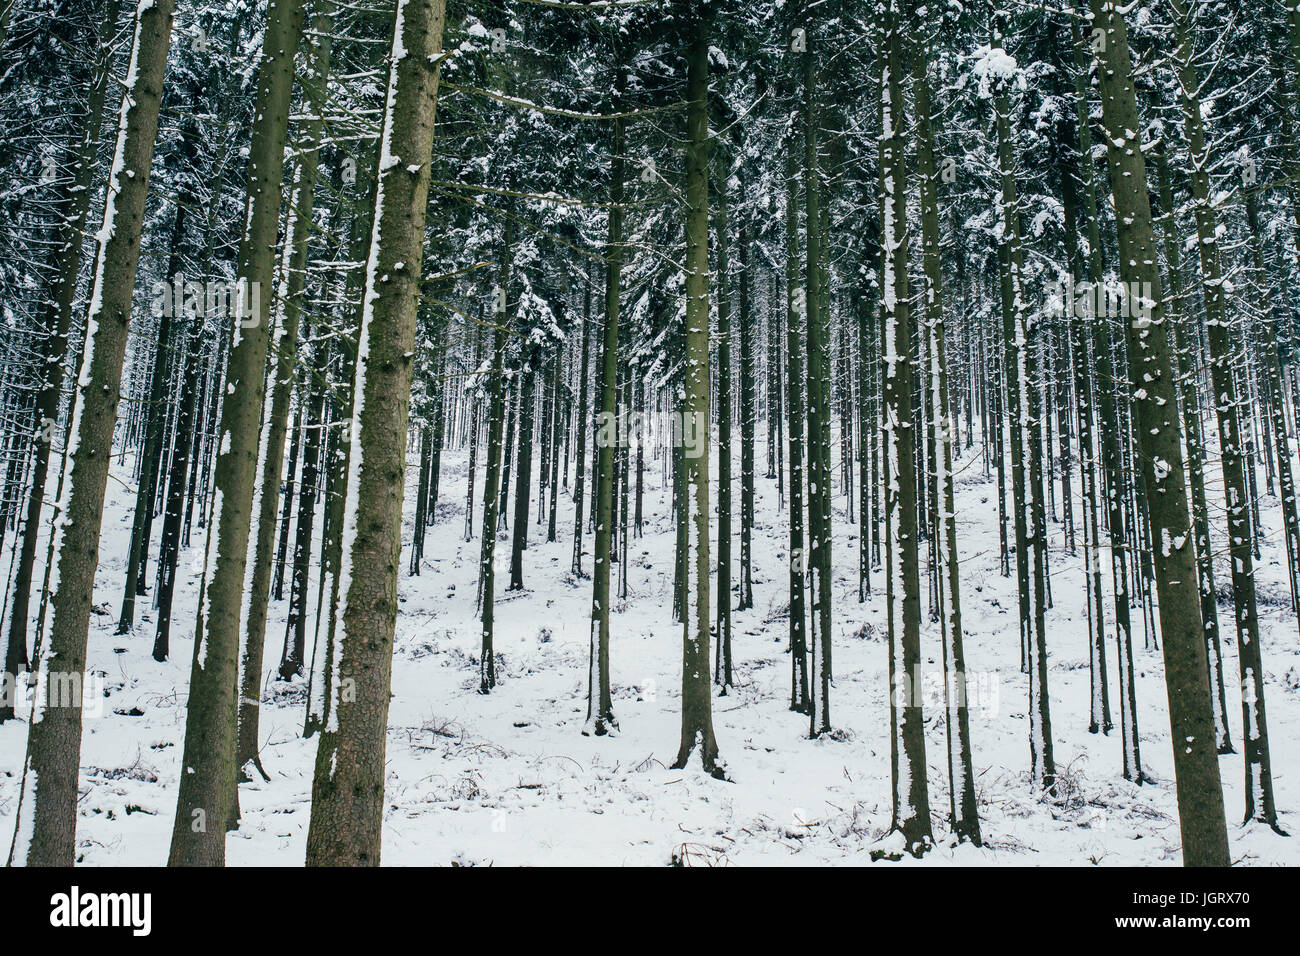 Winter forest treescape with the trees covered in snow giving the woods a dark mysterious vibe. Stock Photo